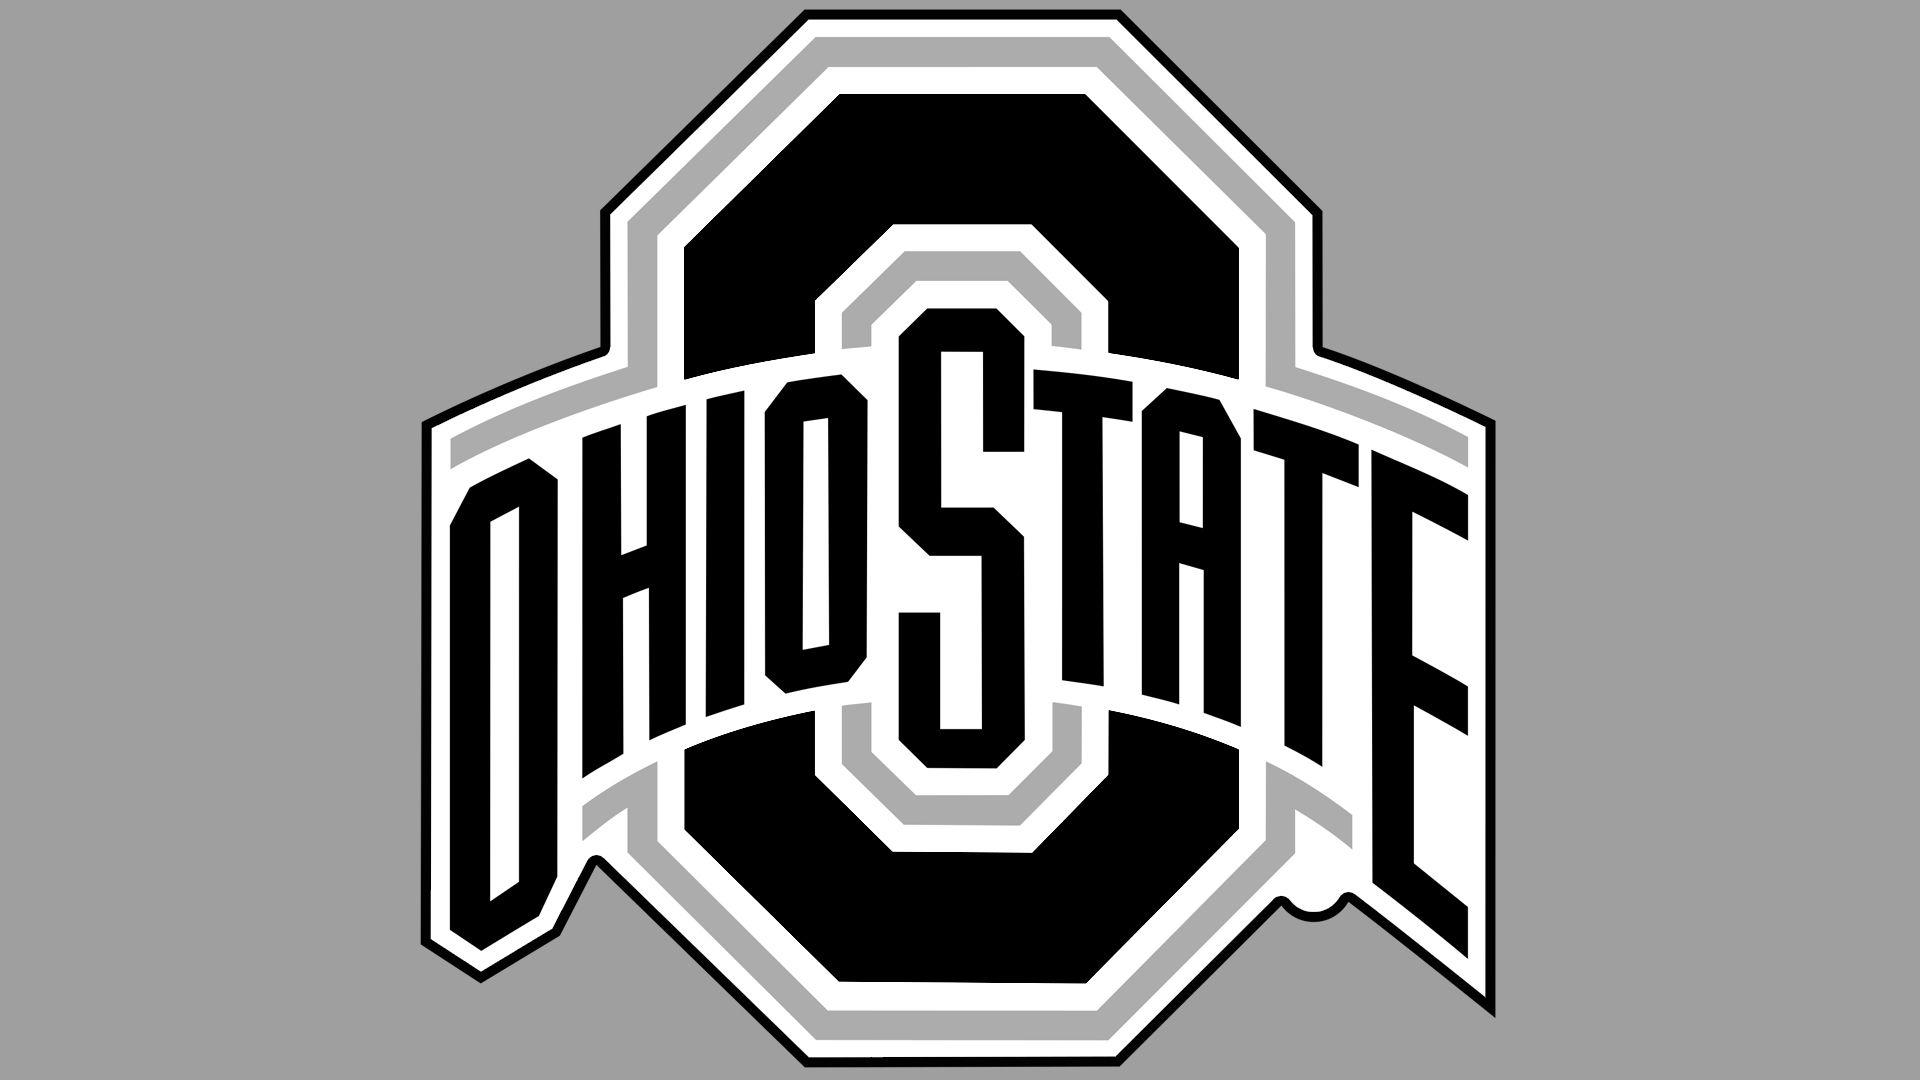 The State Logo - Ohio State Logo, Ohio State Symbol, Meaning, History and Evolution